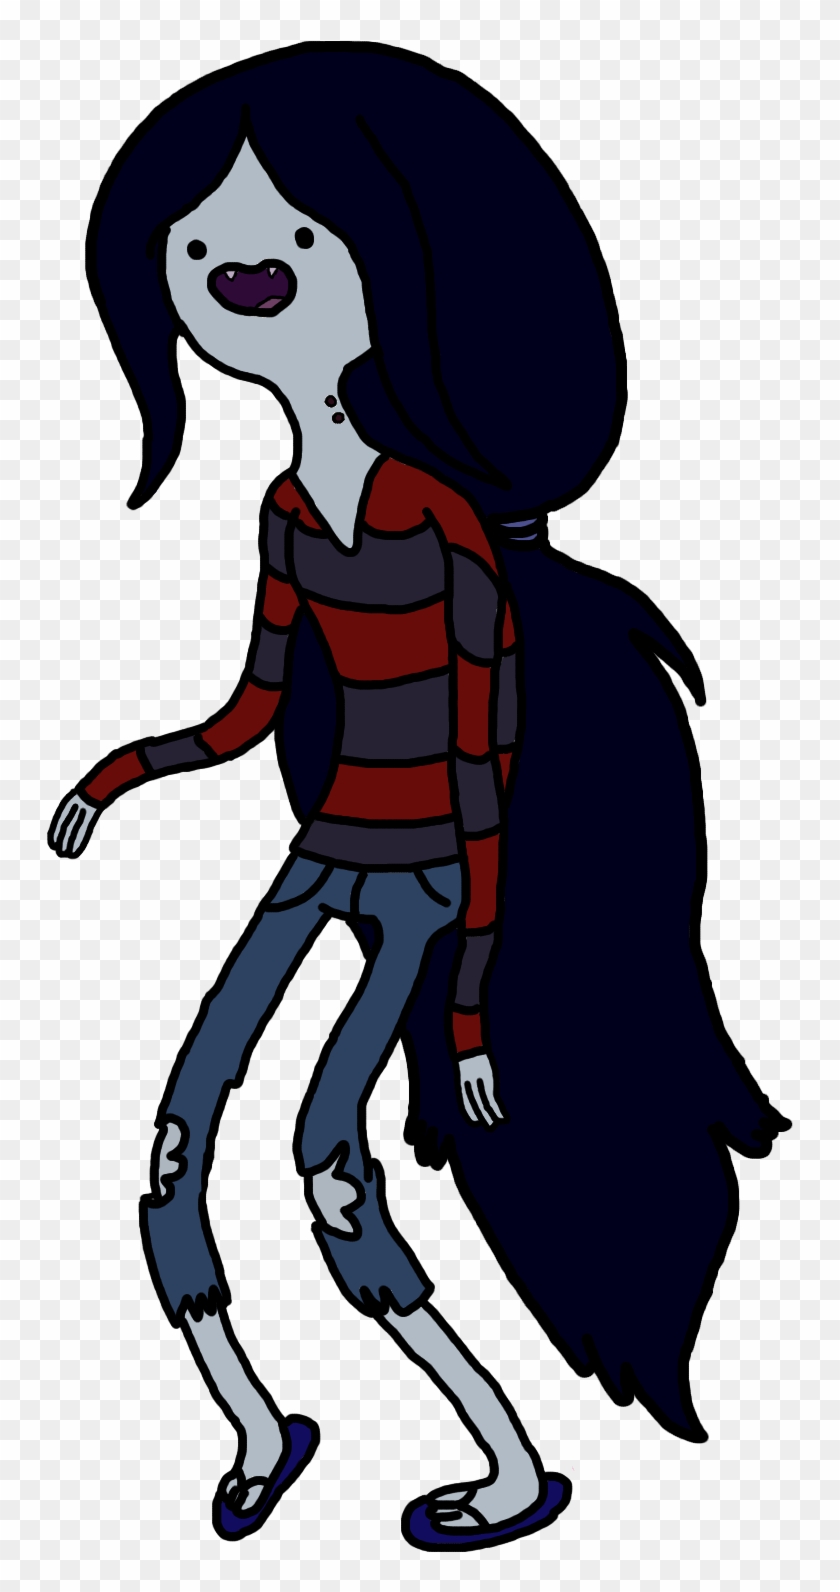 Marceline The Vampire Queen By Bethanypaige8d Marceline - Marceline The Vampire Queen #634653